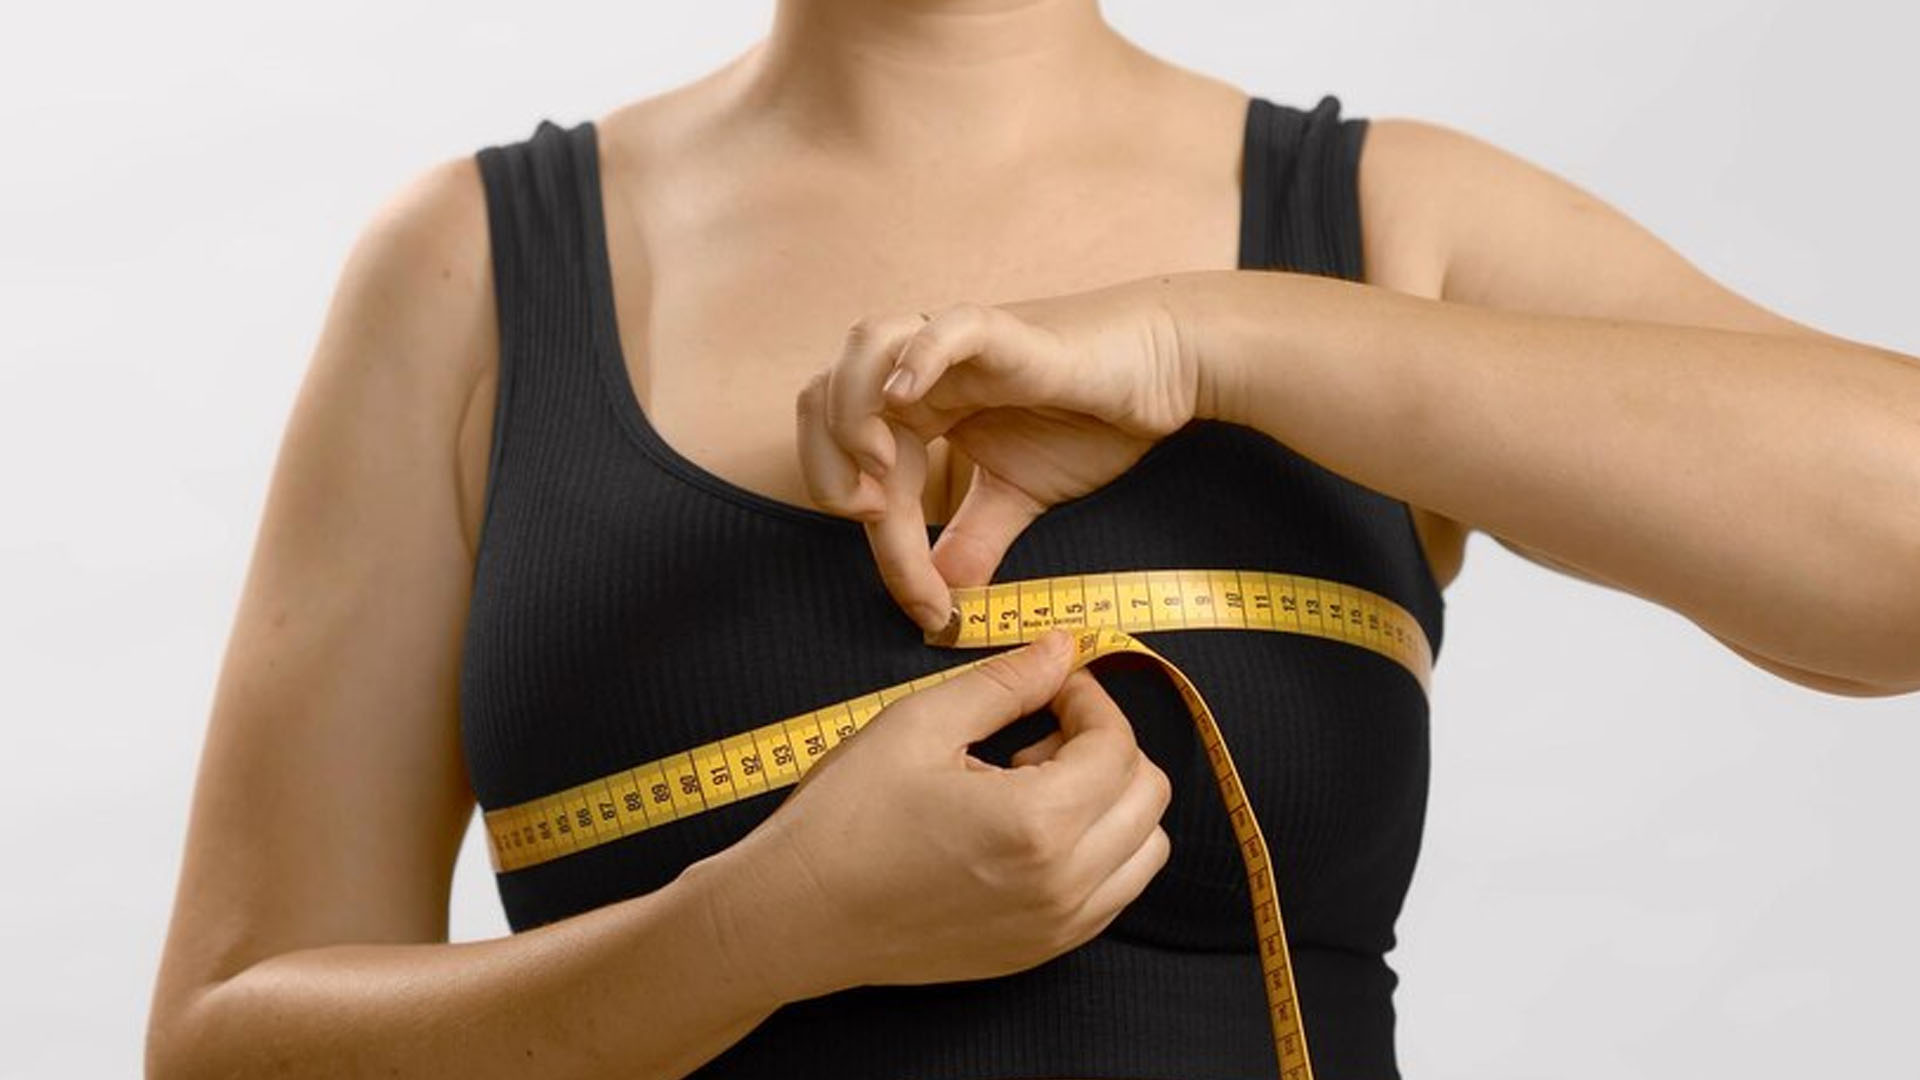 What are the Home Remedies to increase Breast Size in 10 Days?